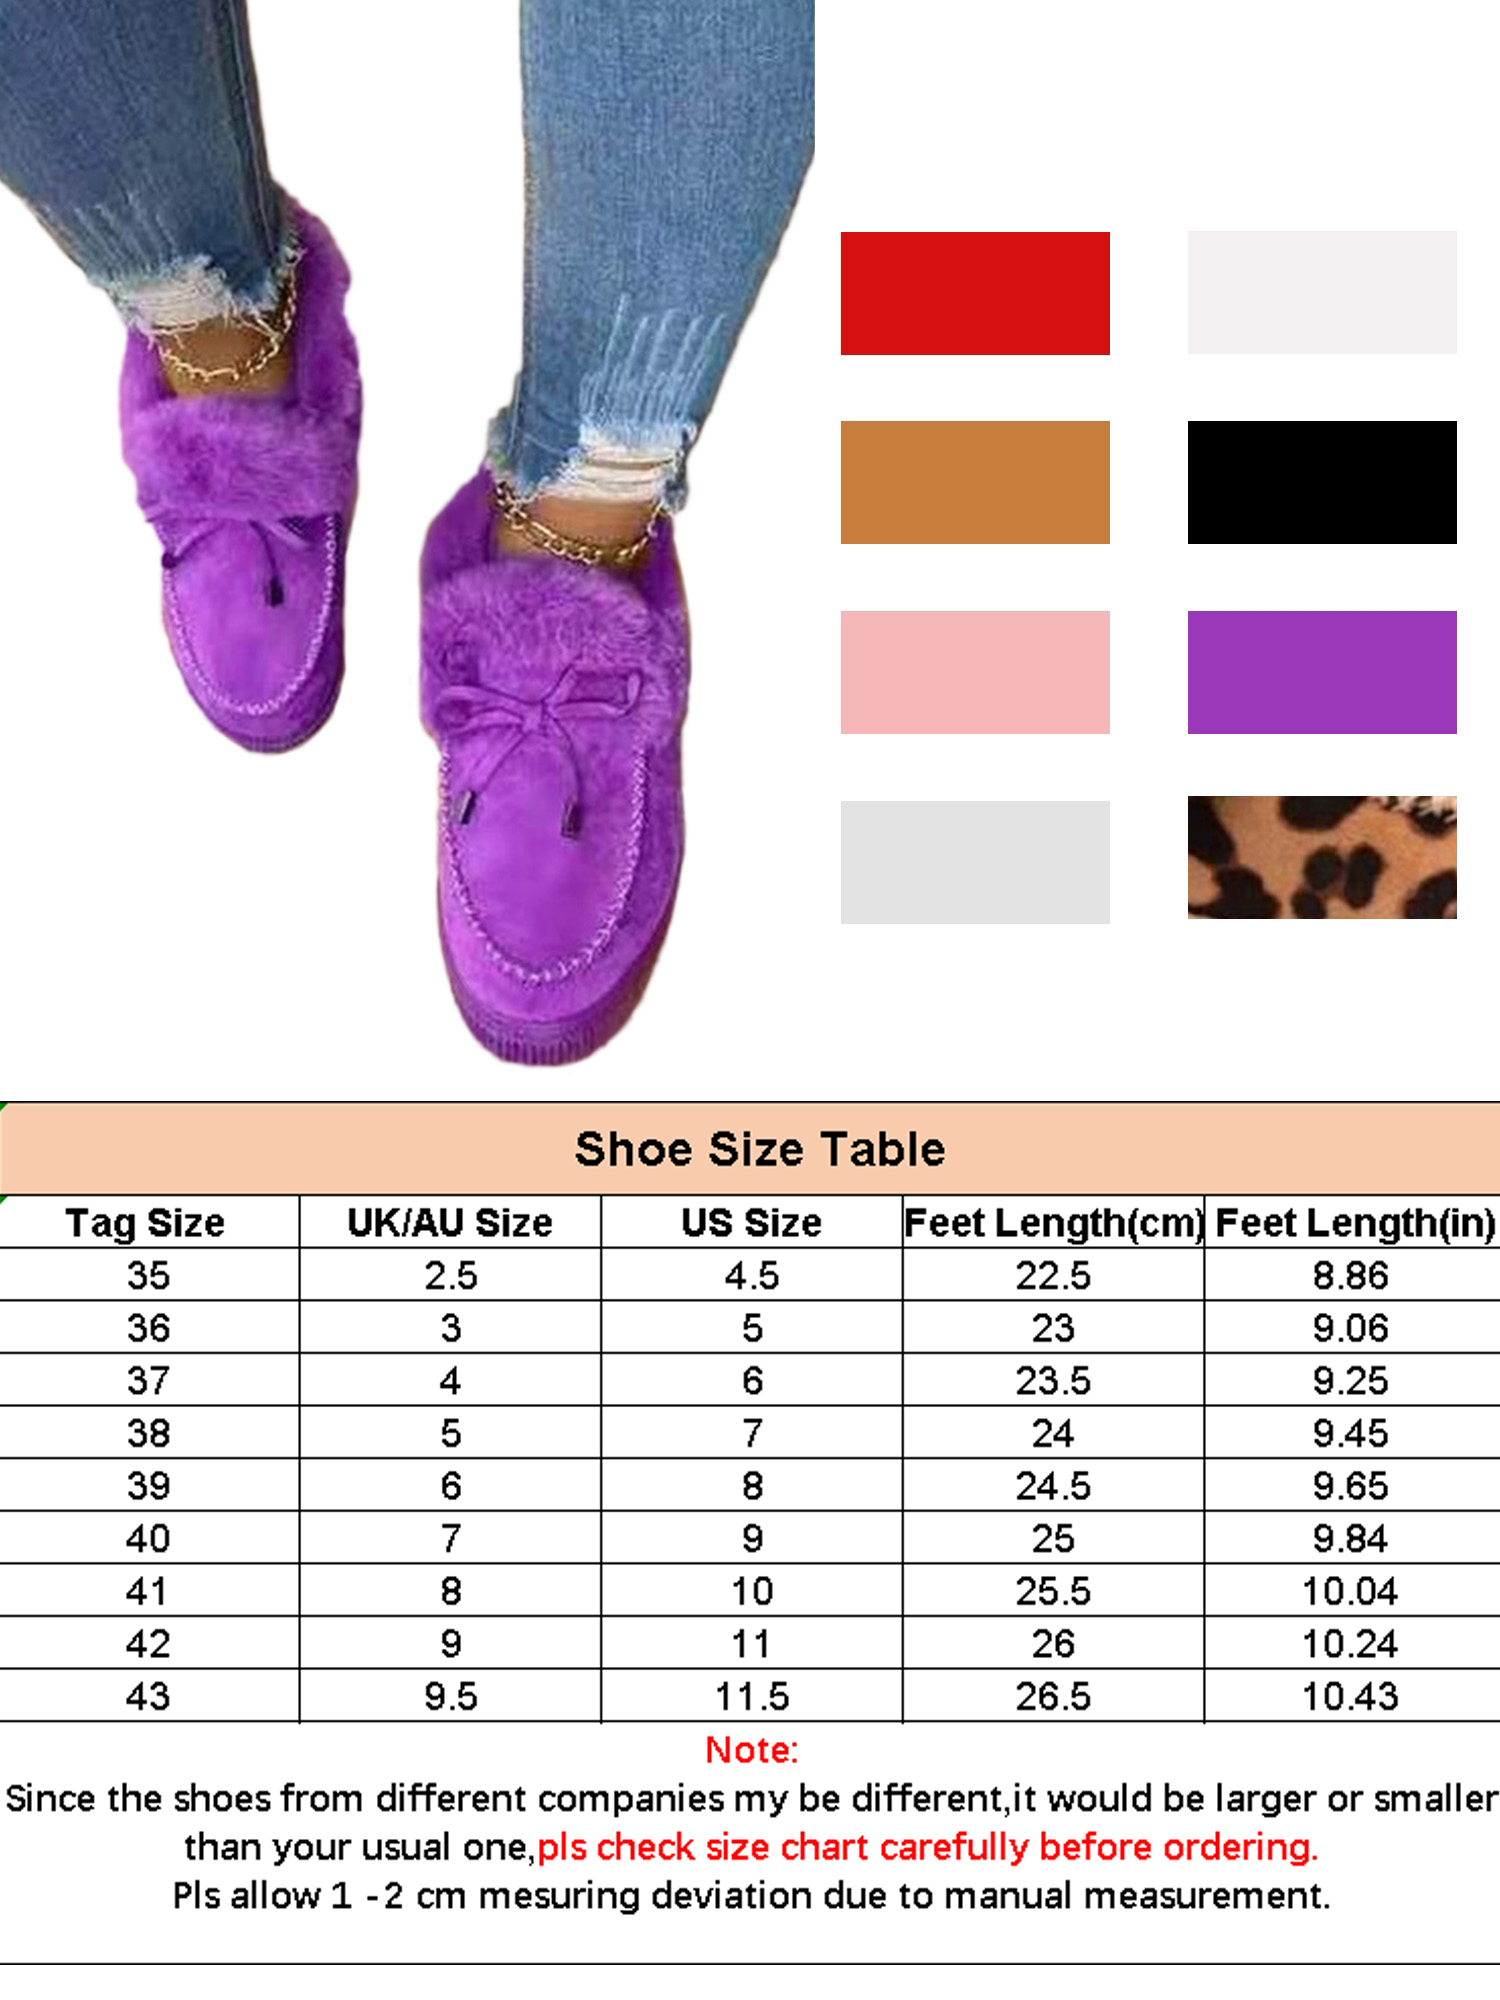 Avamo Women's Casual Shoes Loafers Plush Lined Low Top Casual Shoes Winter Warmer - image 2 of 2